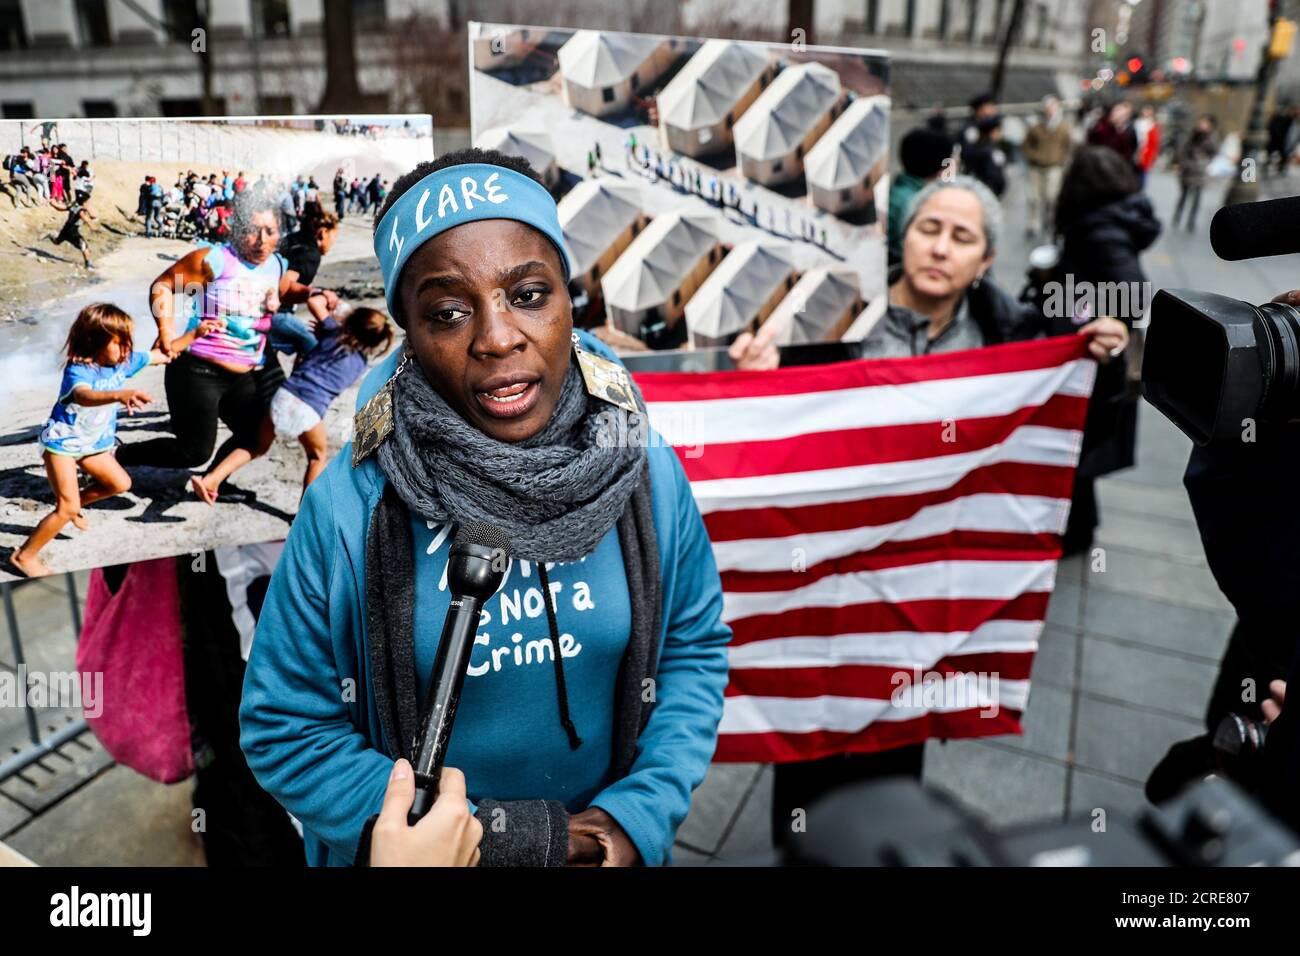 Therese Okoumou, Statue of Liberty climber, talks to media at the United States Courthouse in the Manhattan borough of New York City, New York, U.S., December 17, 2018. REUTERS/Jeenah Moon Stock Photo